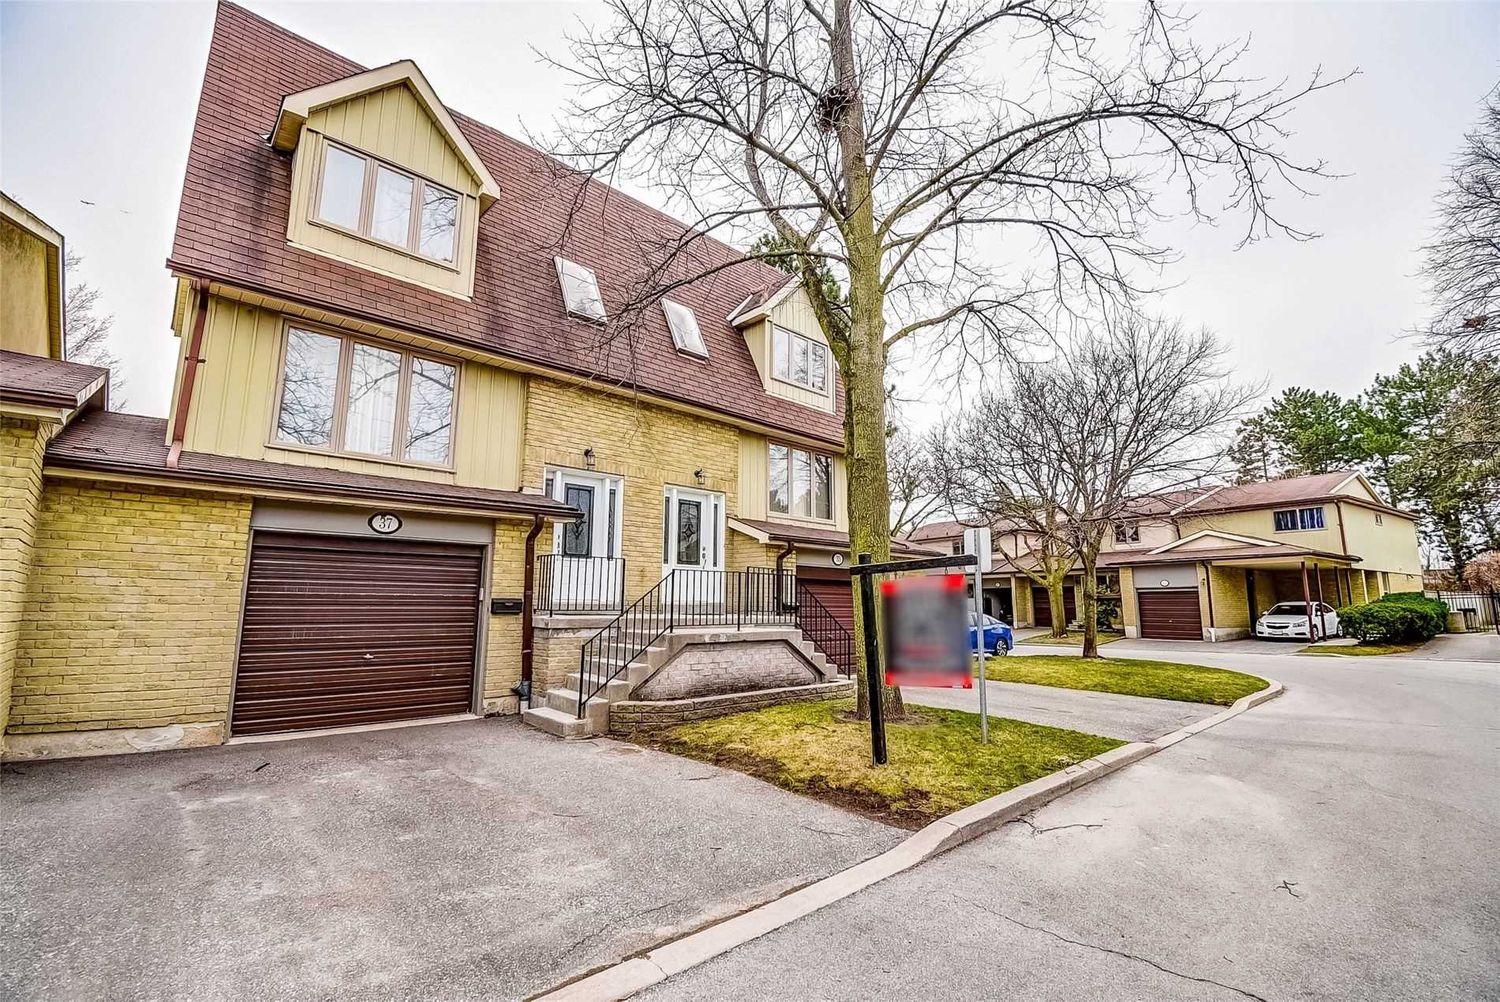 2655 Gananoque Drive. 2655 Gananoque Drive Townhomes is located in  Mississauga, Toronto - image #1 of 2